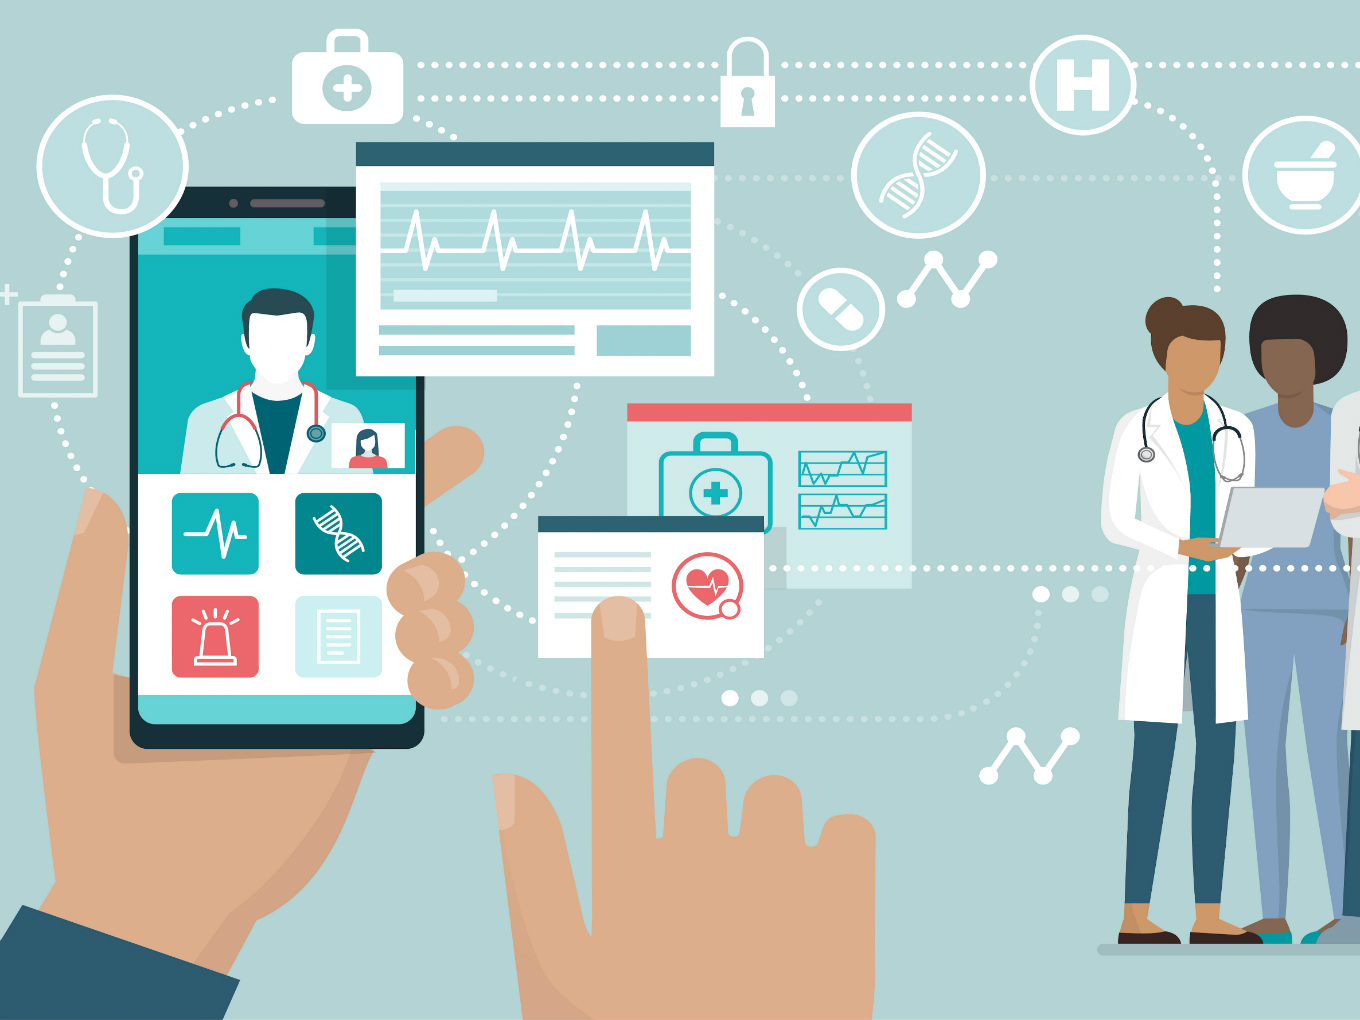 Sixth Sense Ventures Invests $3 Mn In MyHealthcare- Is The Healthcare Sector Ripe For Disruption?-InnoCirc Backed MyHealthcare Raises $2Mn, Plans To Add AI, ML Technologies